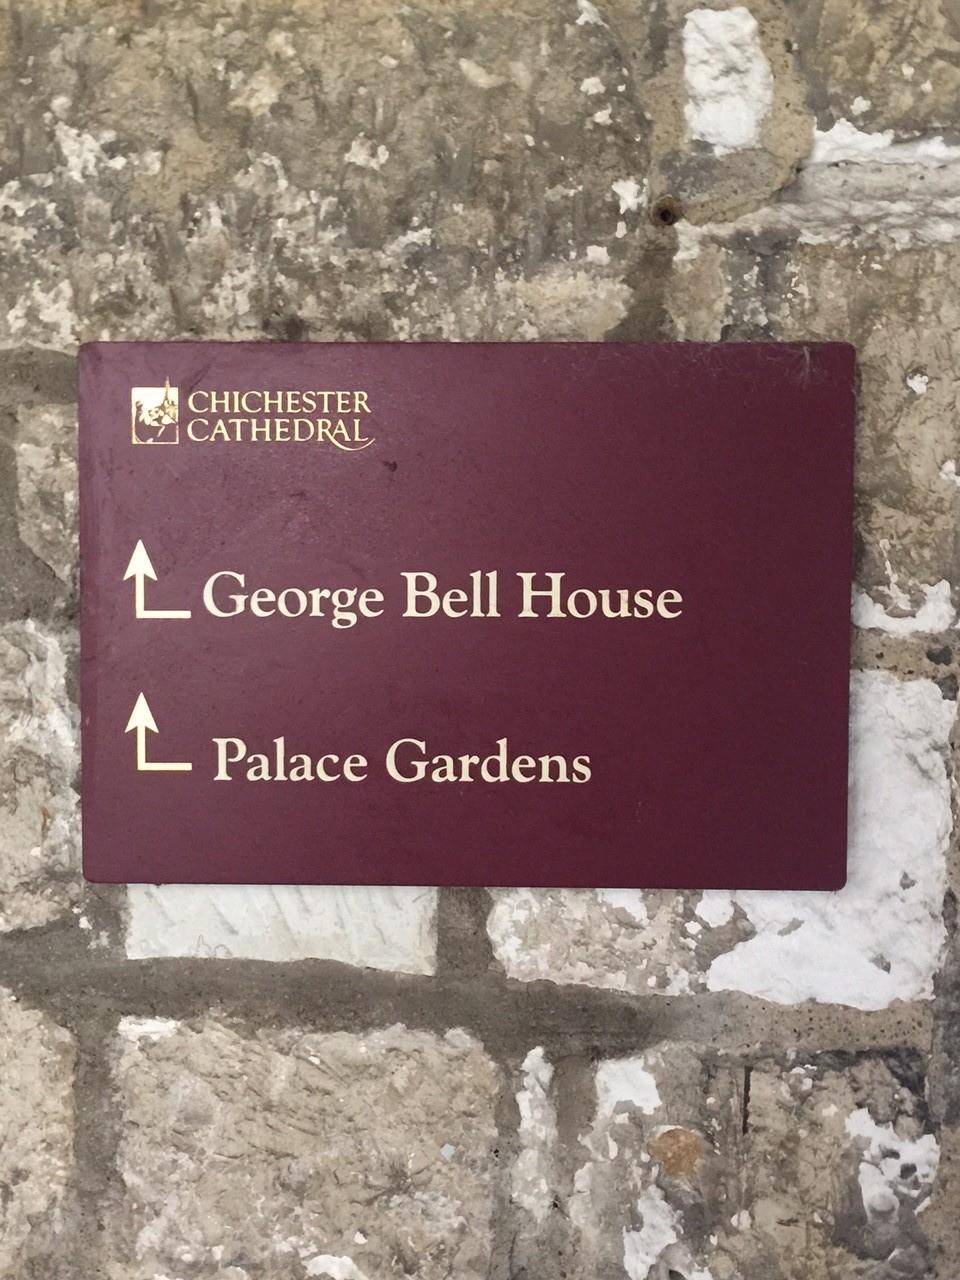 Bishop George Bell name restored to Chichester Cathedral building - BBC News